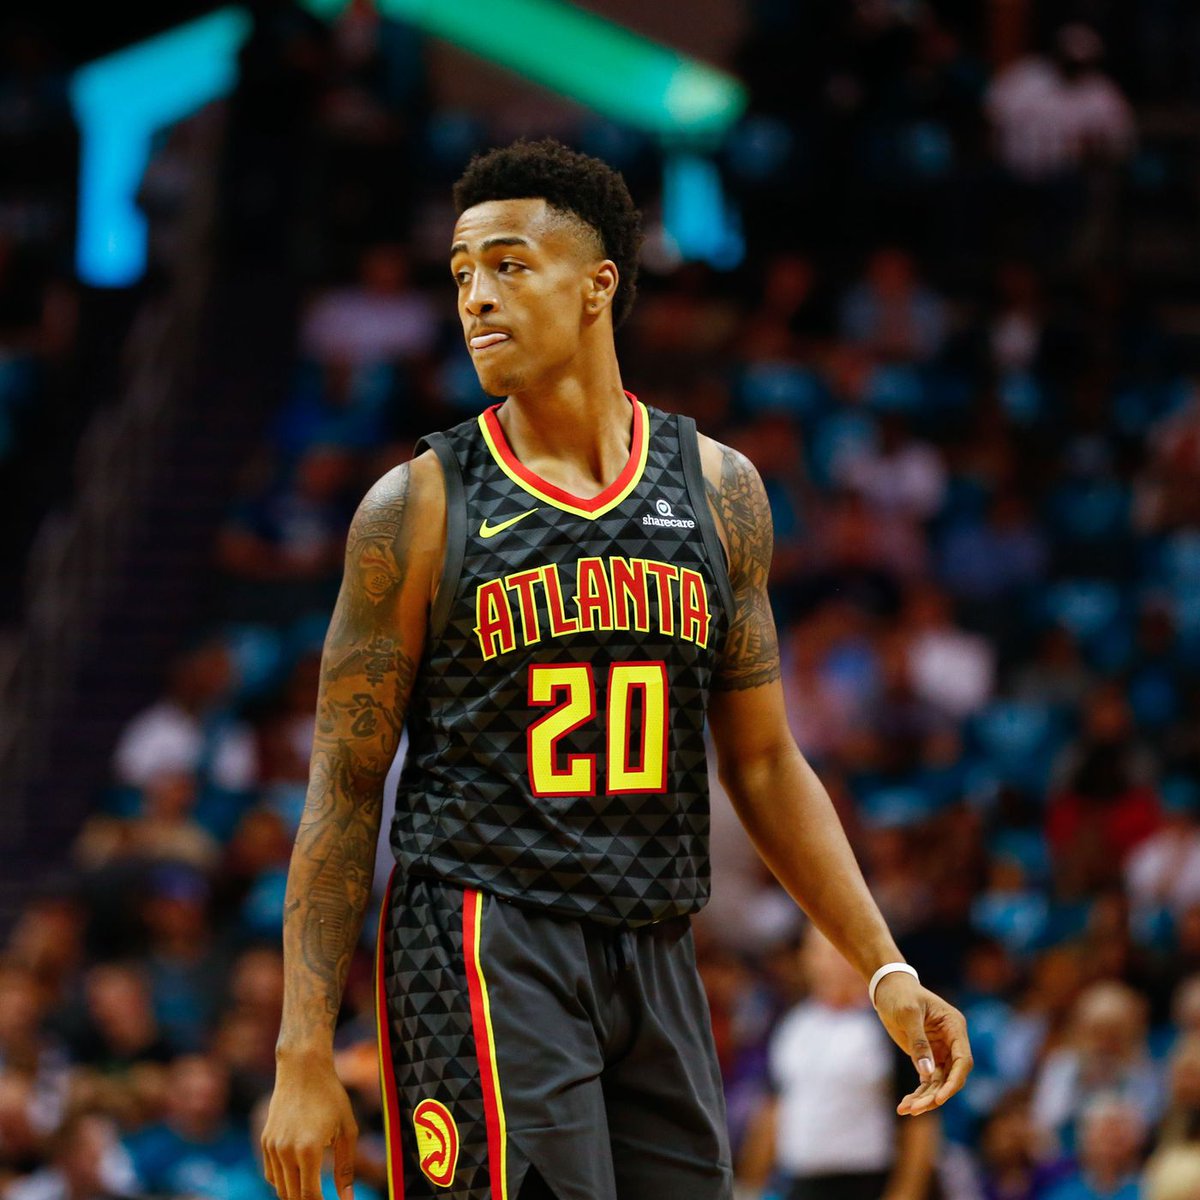 atlanta hawks 2017 draft pick 19original pick: john collinsnew pick: john collins stillby 2017 atlanta had fully started their rebuild and they needed the best young player available, and they hit it on the head with collins, who's turned out to be a great player for them